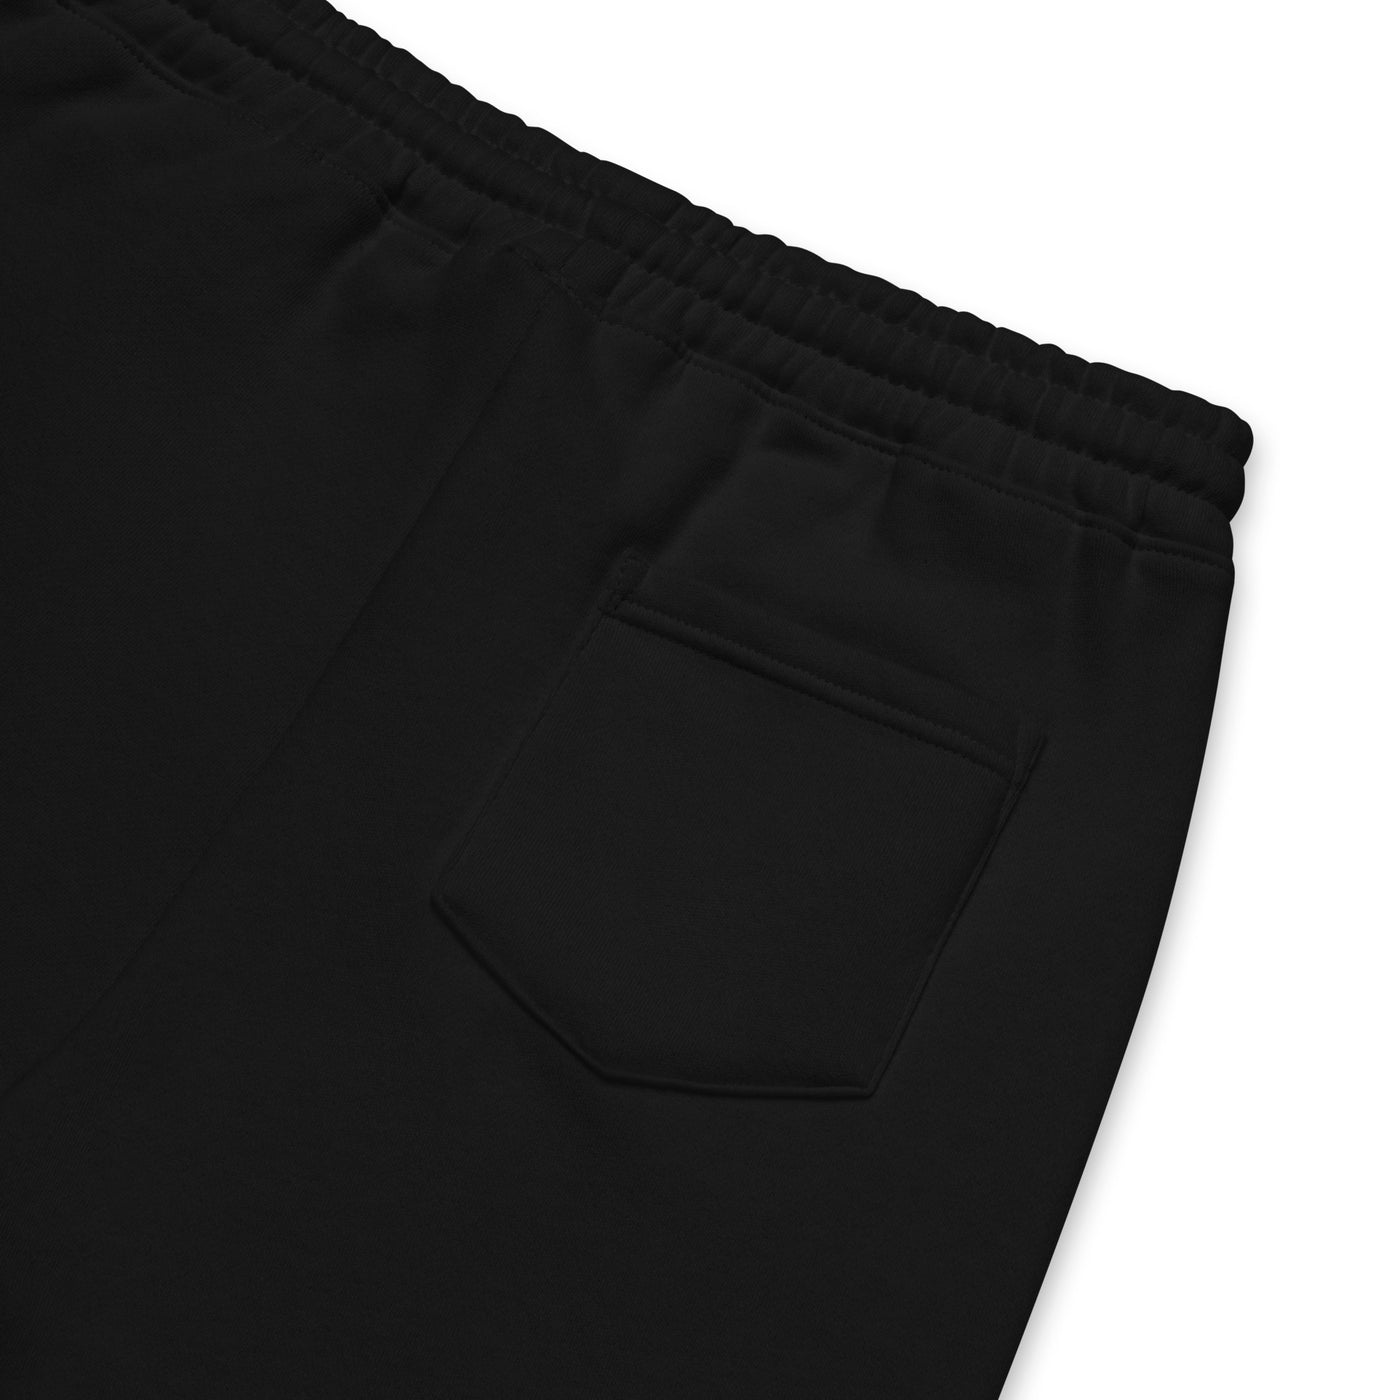  4iCe® Icon Elite Boxing black embroidered shorts details